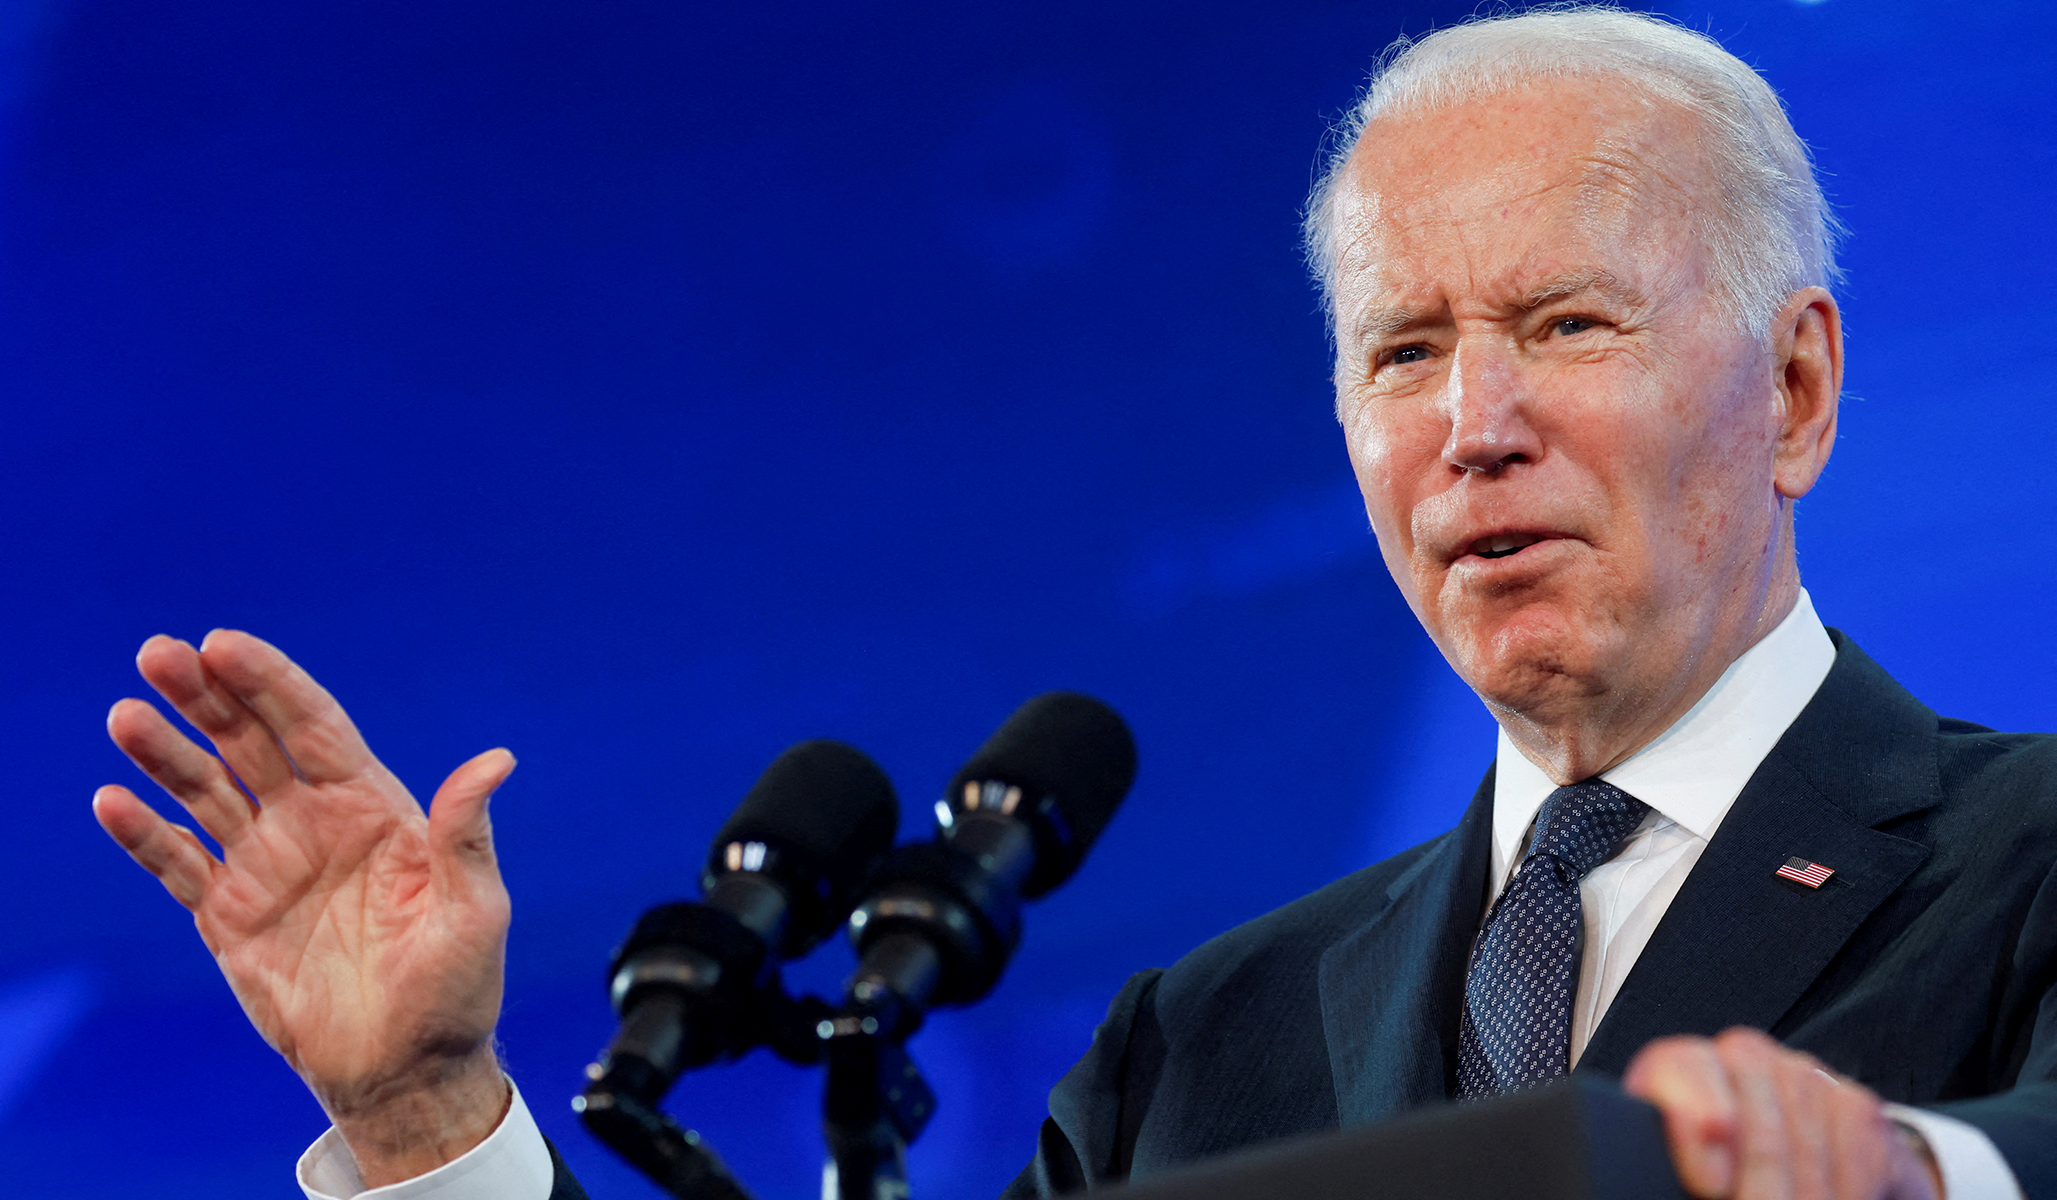 Biden's Poor Approval Ratings Could Drag Down State-Level Dems in Midterms, New Poll Shows